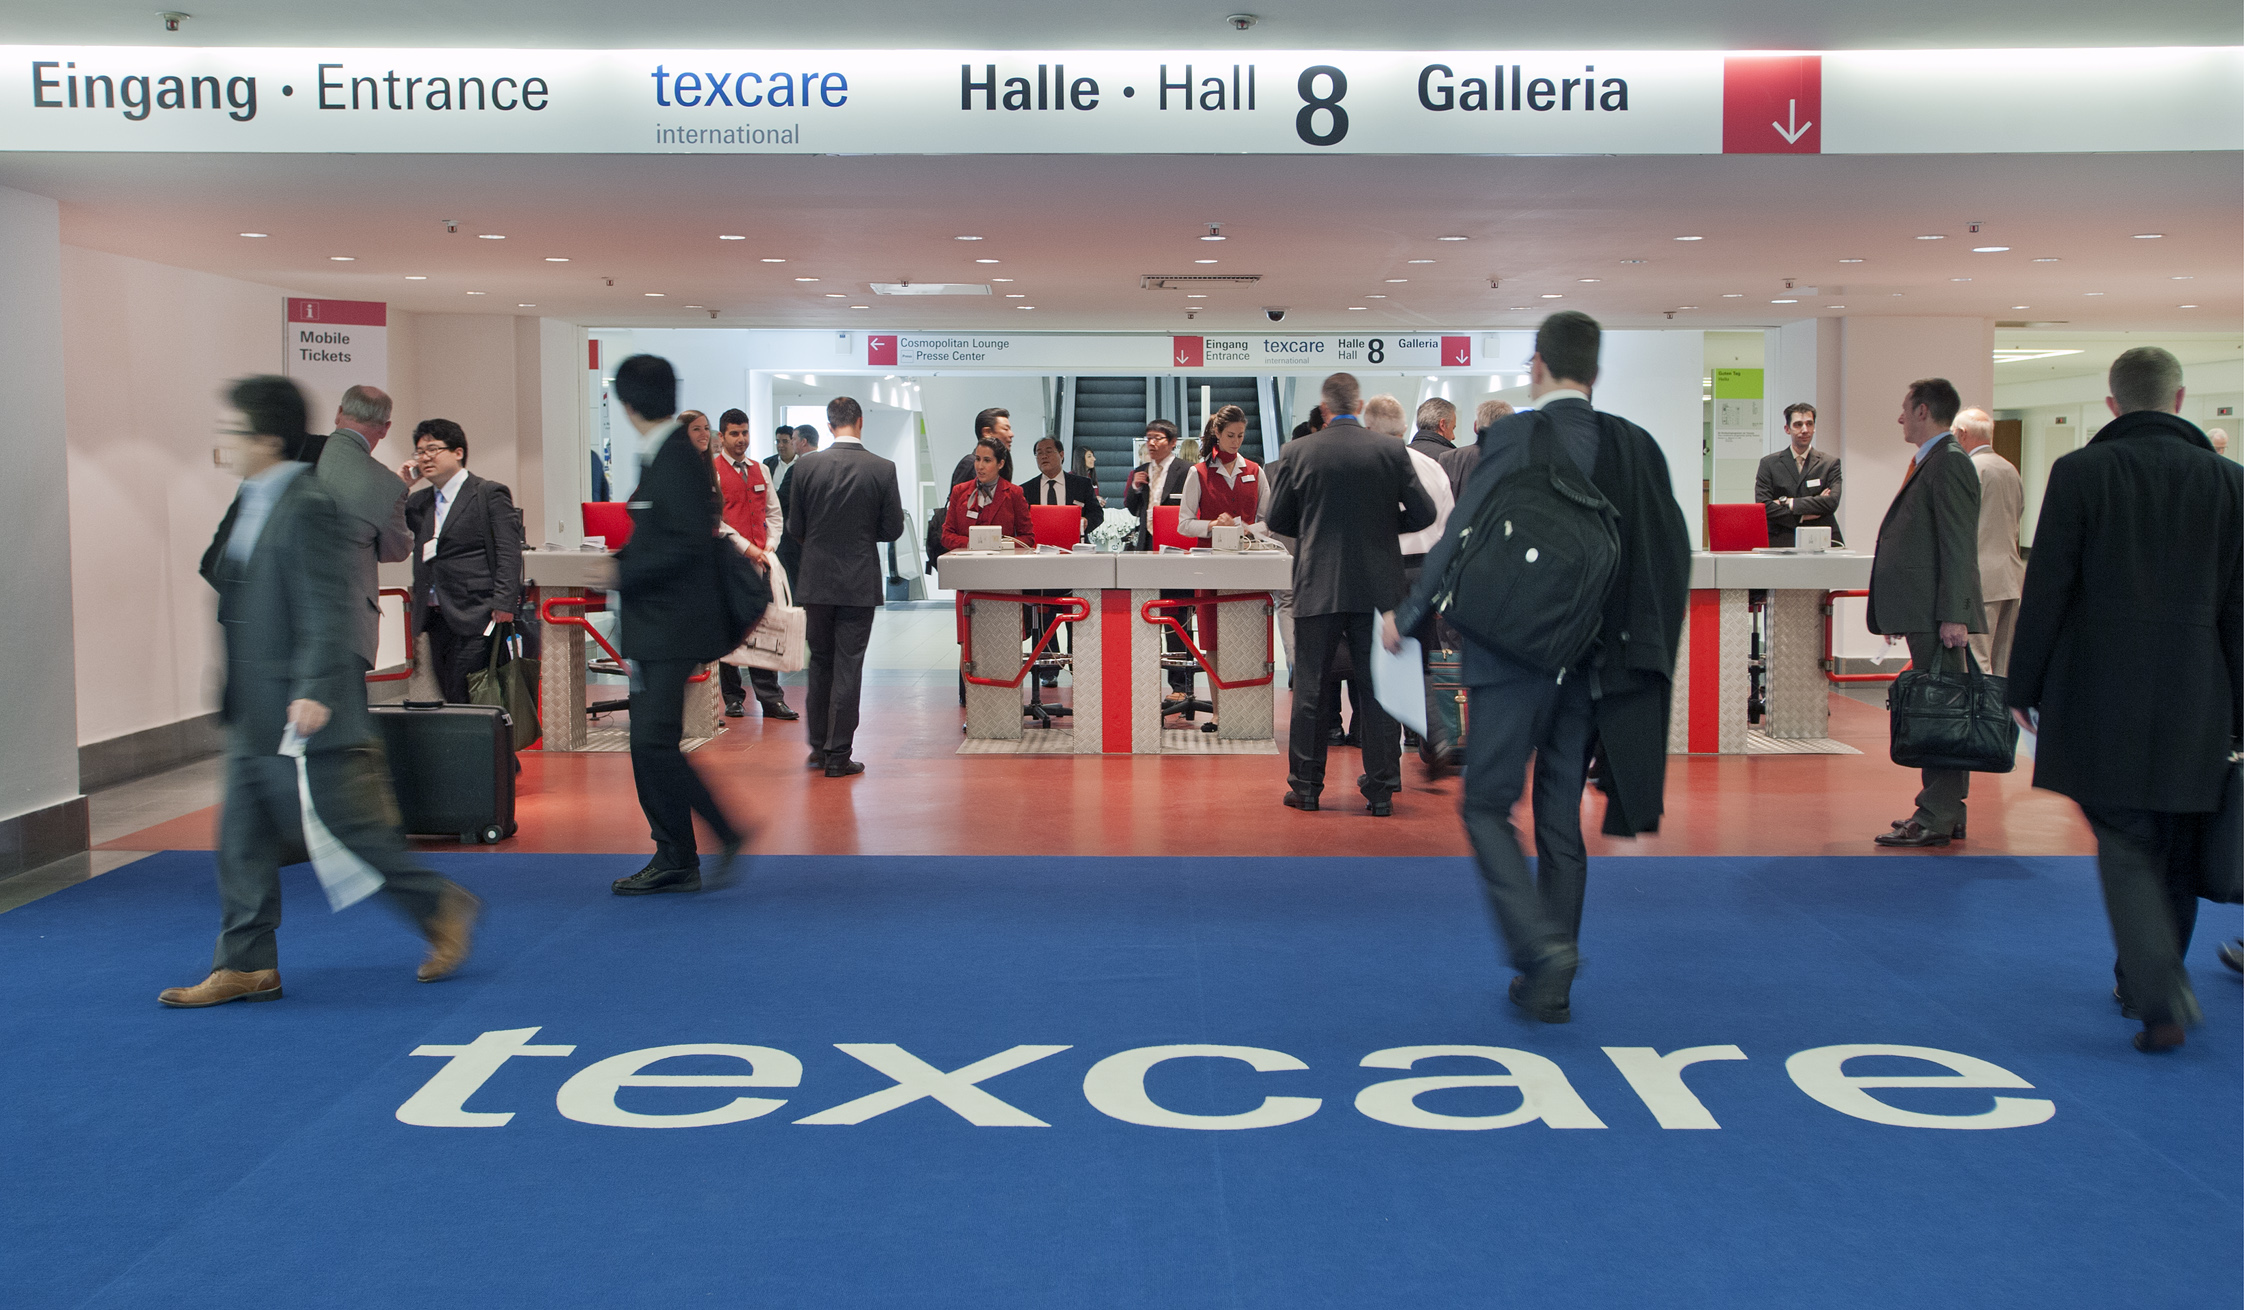 At the forthcoming Texcare, the exhibition area will grow in line with the huge demand, organisers report. © Messe Frankfurt GmbH / Petra Welzel